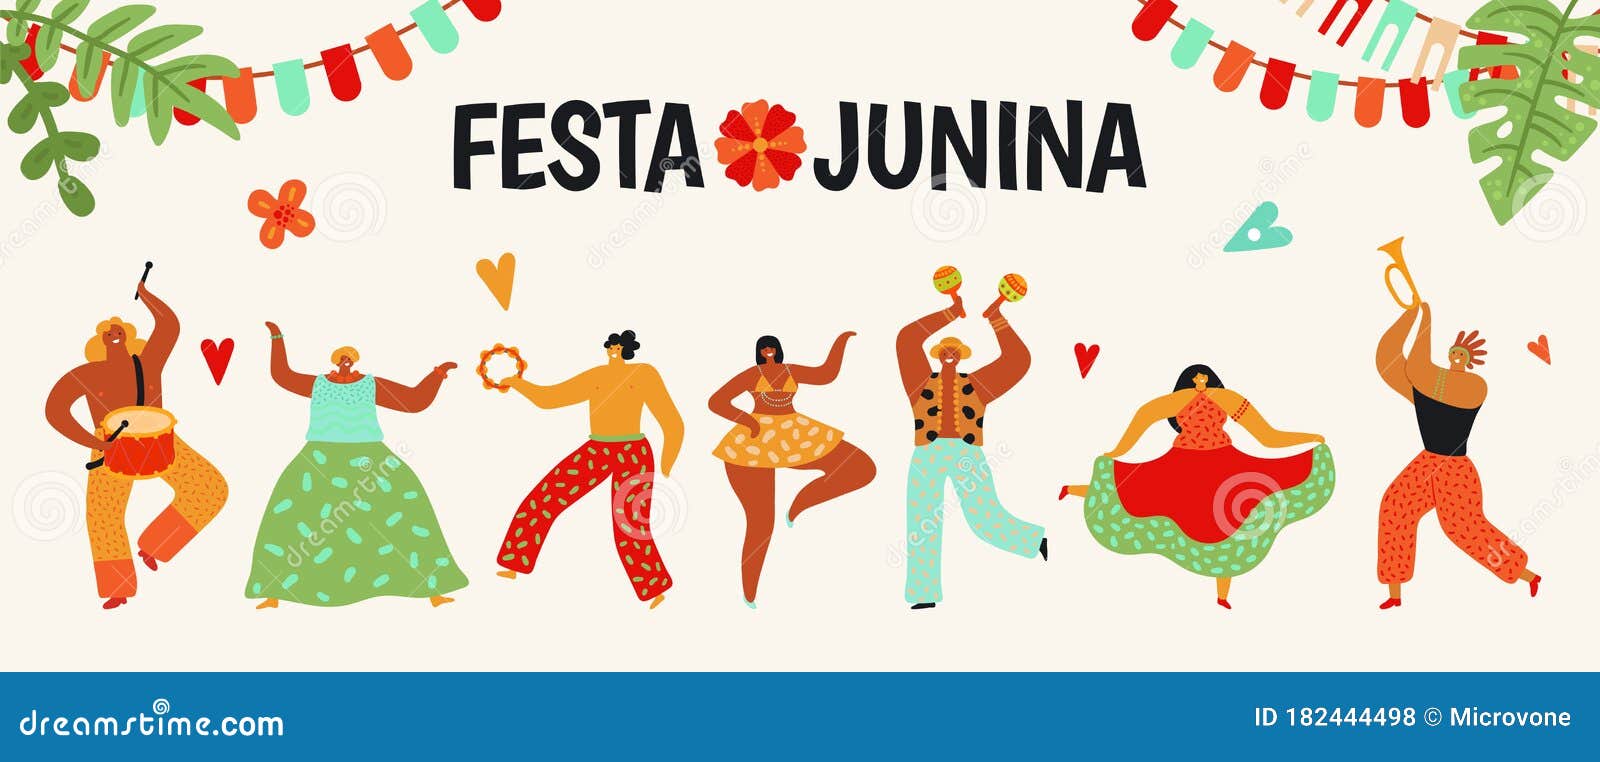 festa junina. tradition brazil party. dancing carnaval, latin june celebration poster. summer holiday woman man with